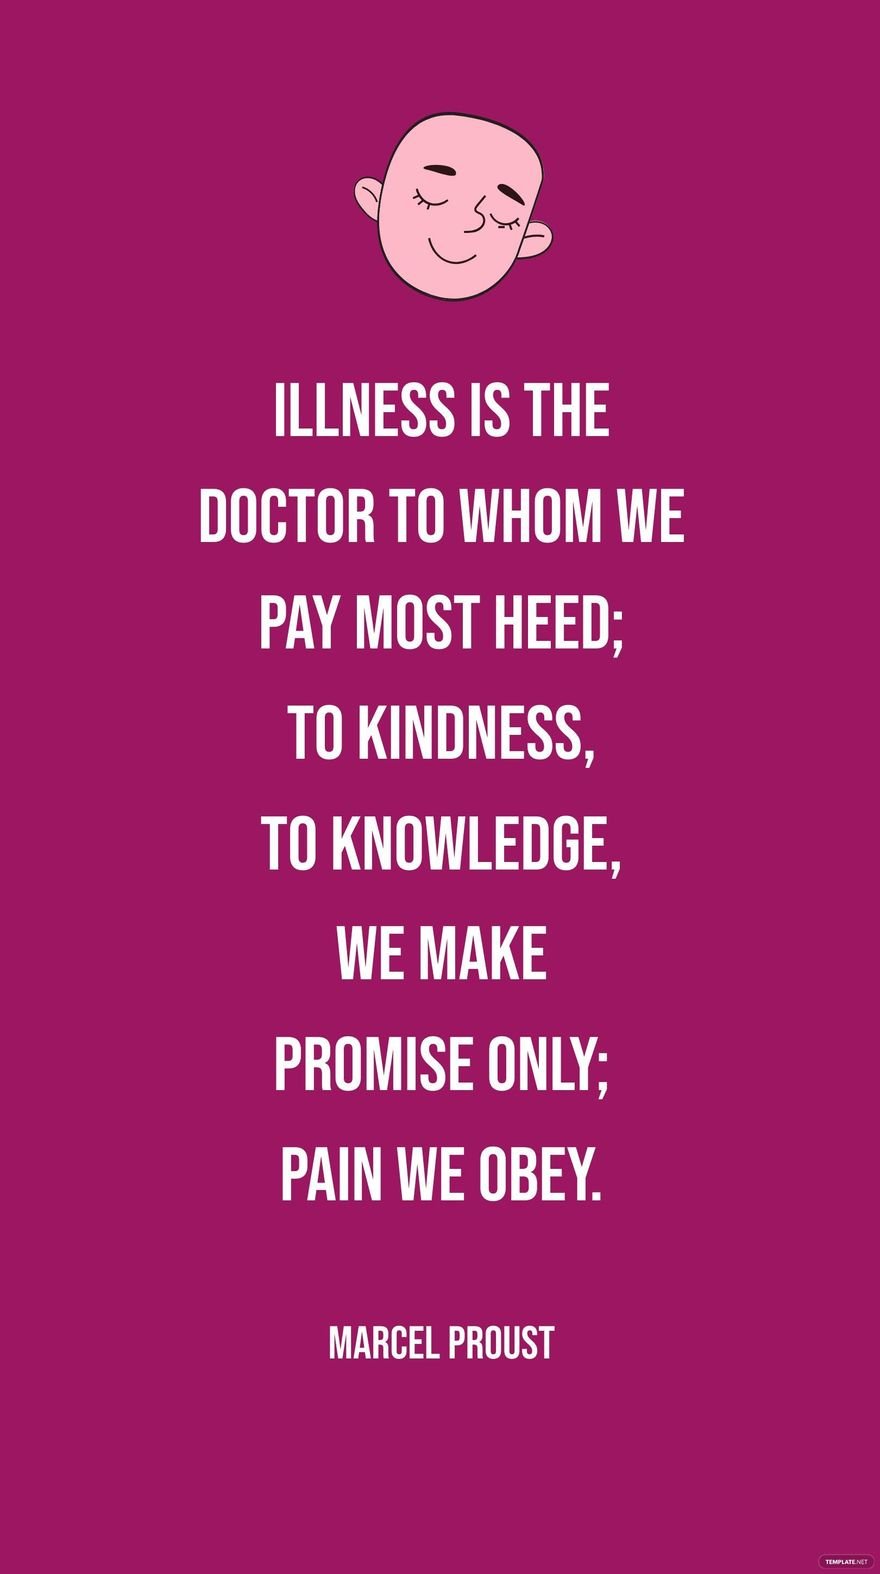 Marcel Proust - Illness is the doctor to whom we pay most heed; to kindness, to knowledge, we make promise only; pain we obey.